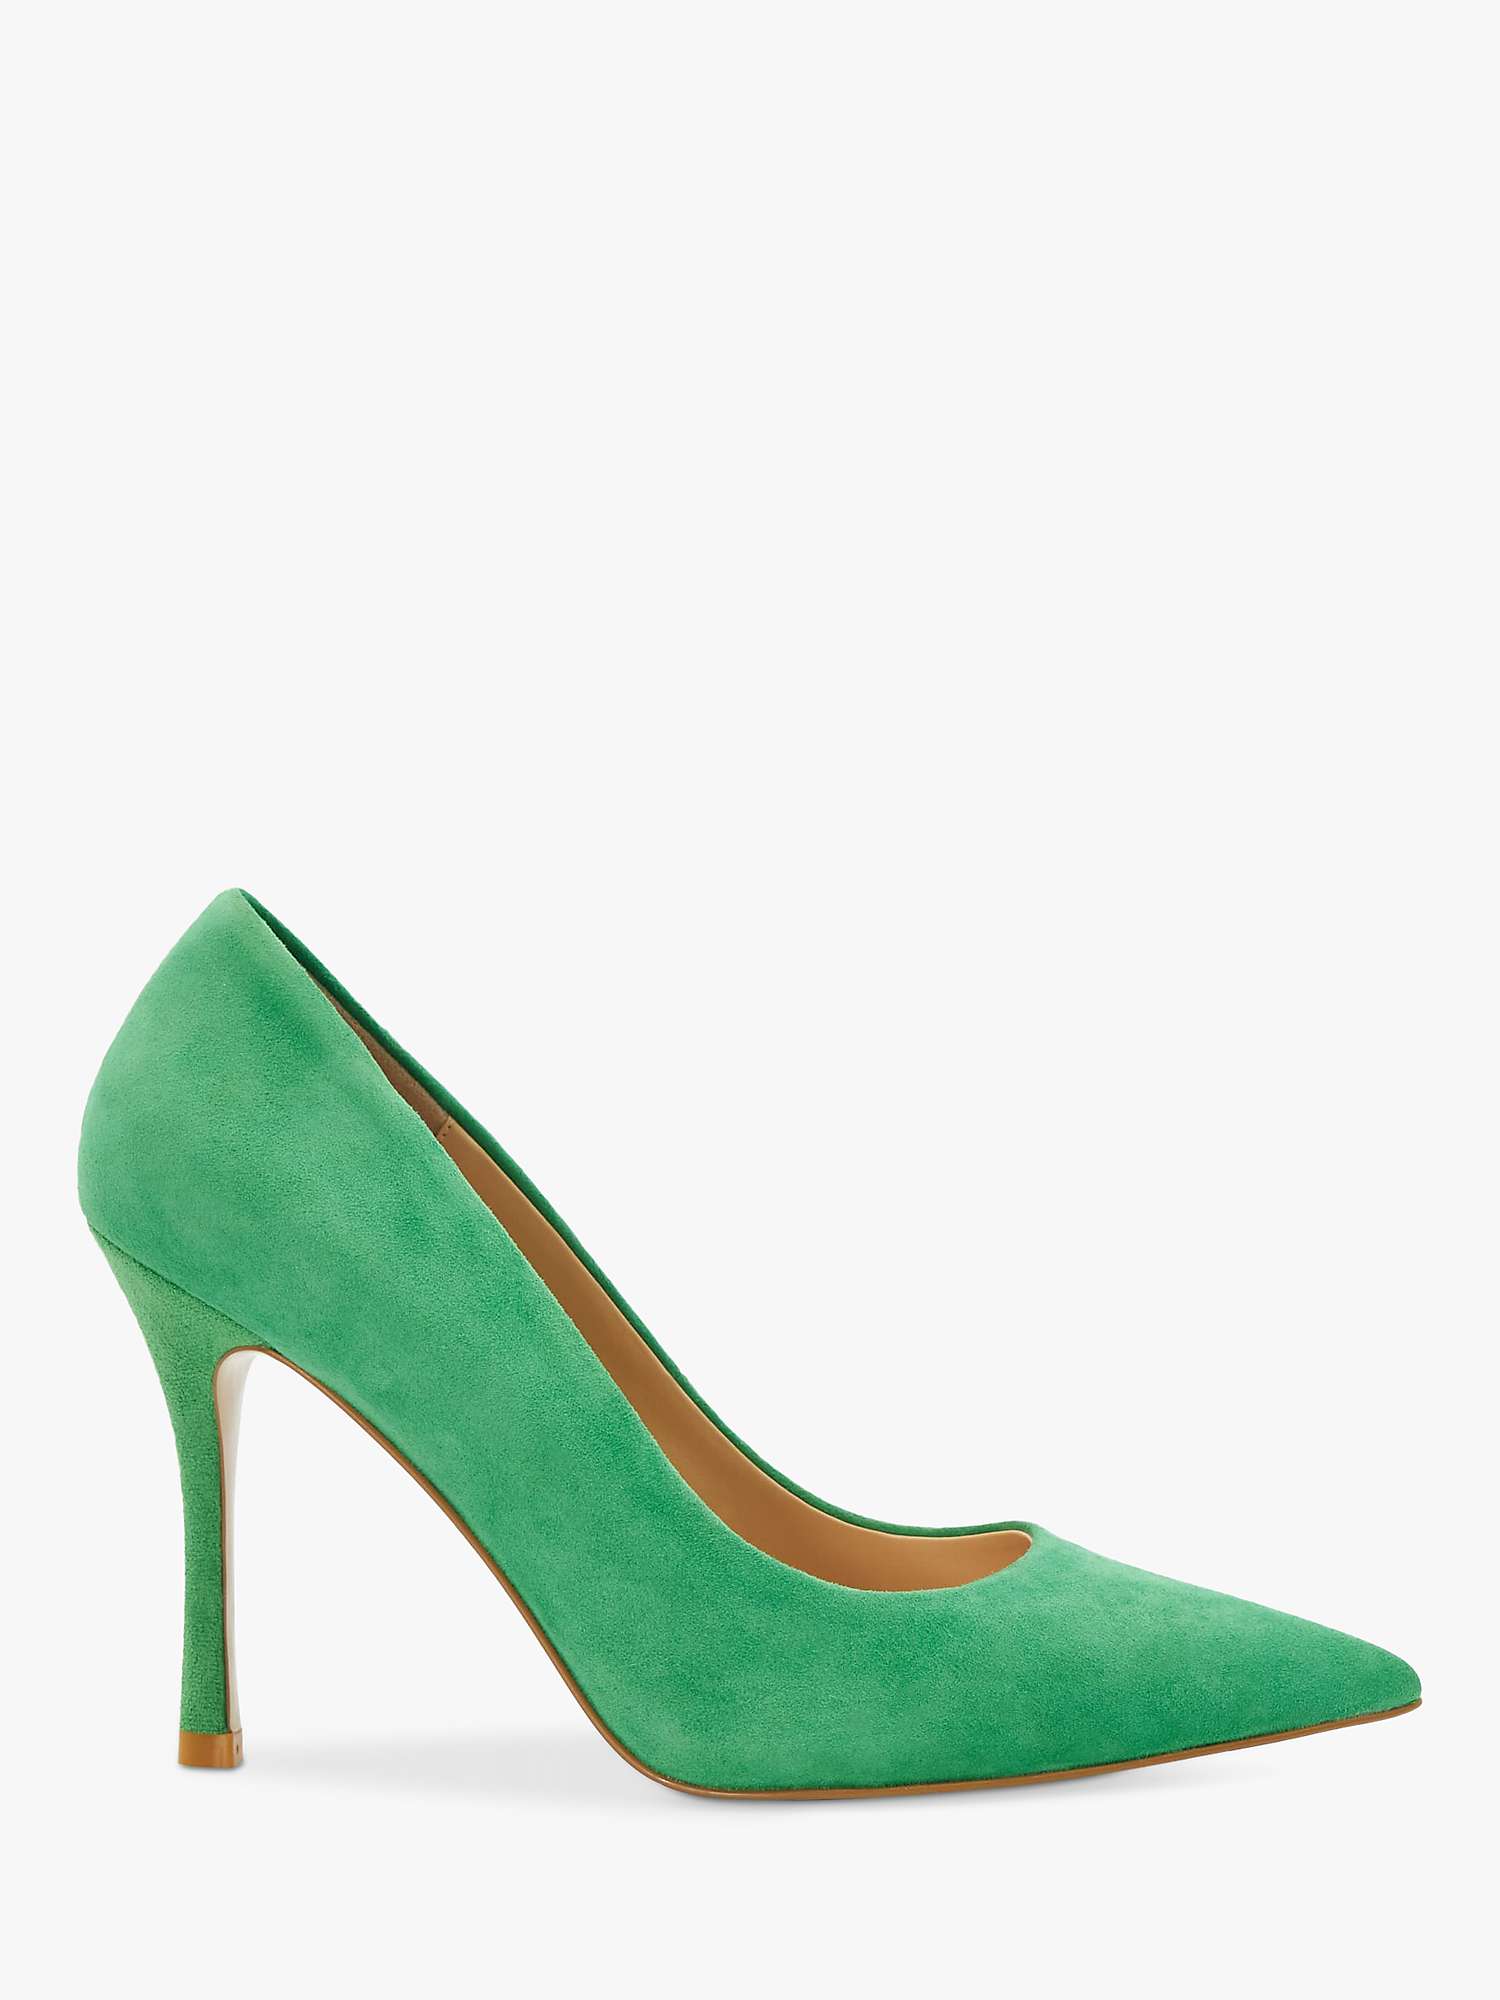 Buy Dune Atlanta Suede High Heel Pointed Court Shoes, Green Online at johnlewis.com